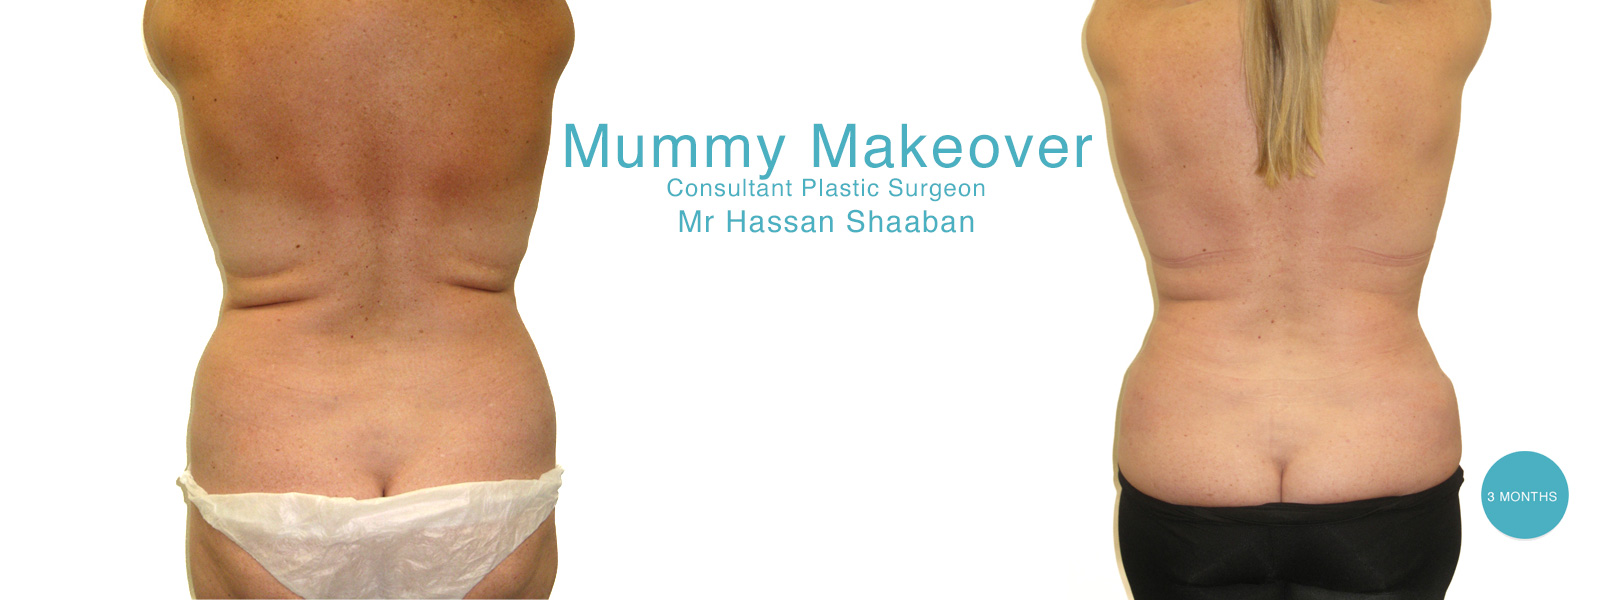 mummy makeover before and after photographs surgical procedures performed in Liverpool by  Mr Hassan Shaaban